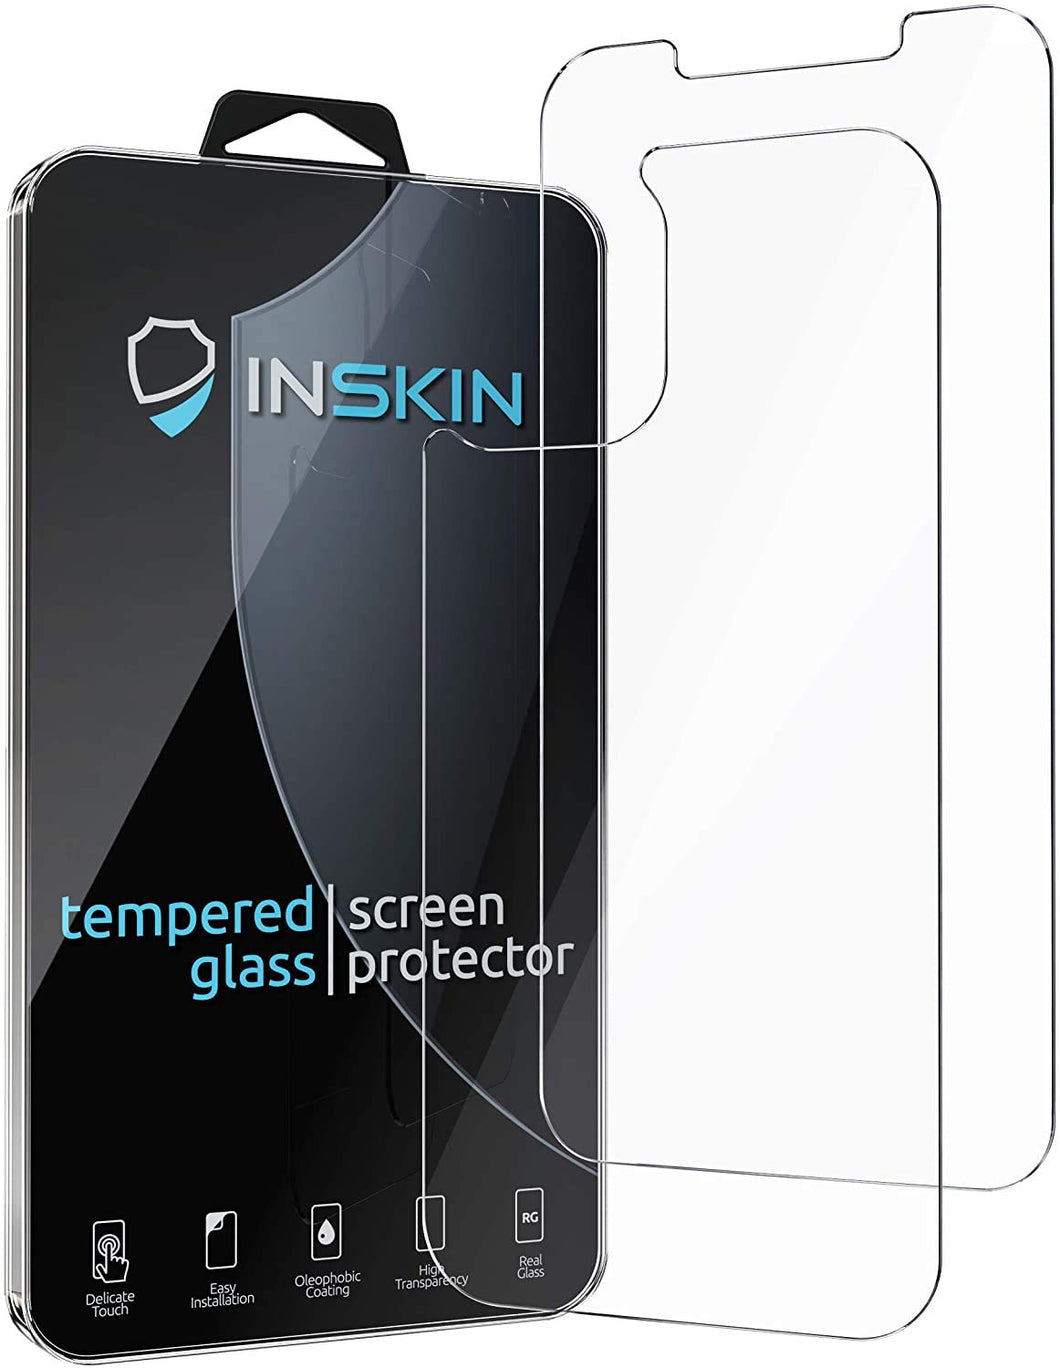 Inskin 2-in-1 Front and Back Tempered Glass Screen Protector, fits Apple iPhone 12 Mini 5.4 inch.